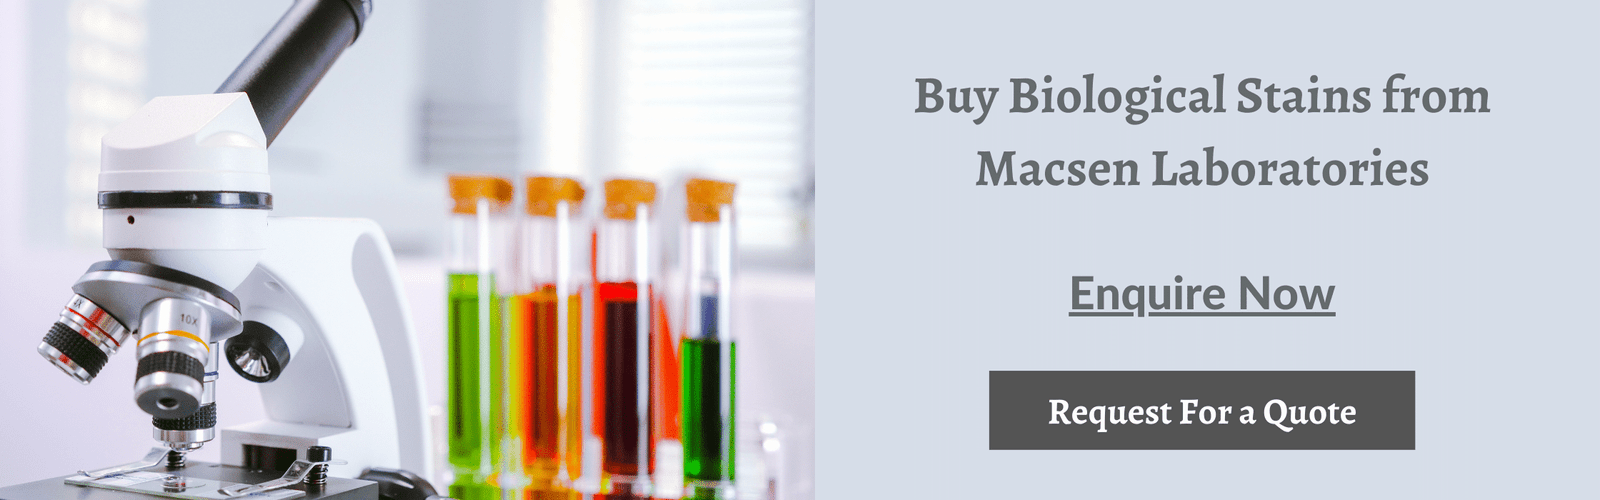 Buy Biological Stains from Macsen Labs